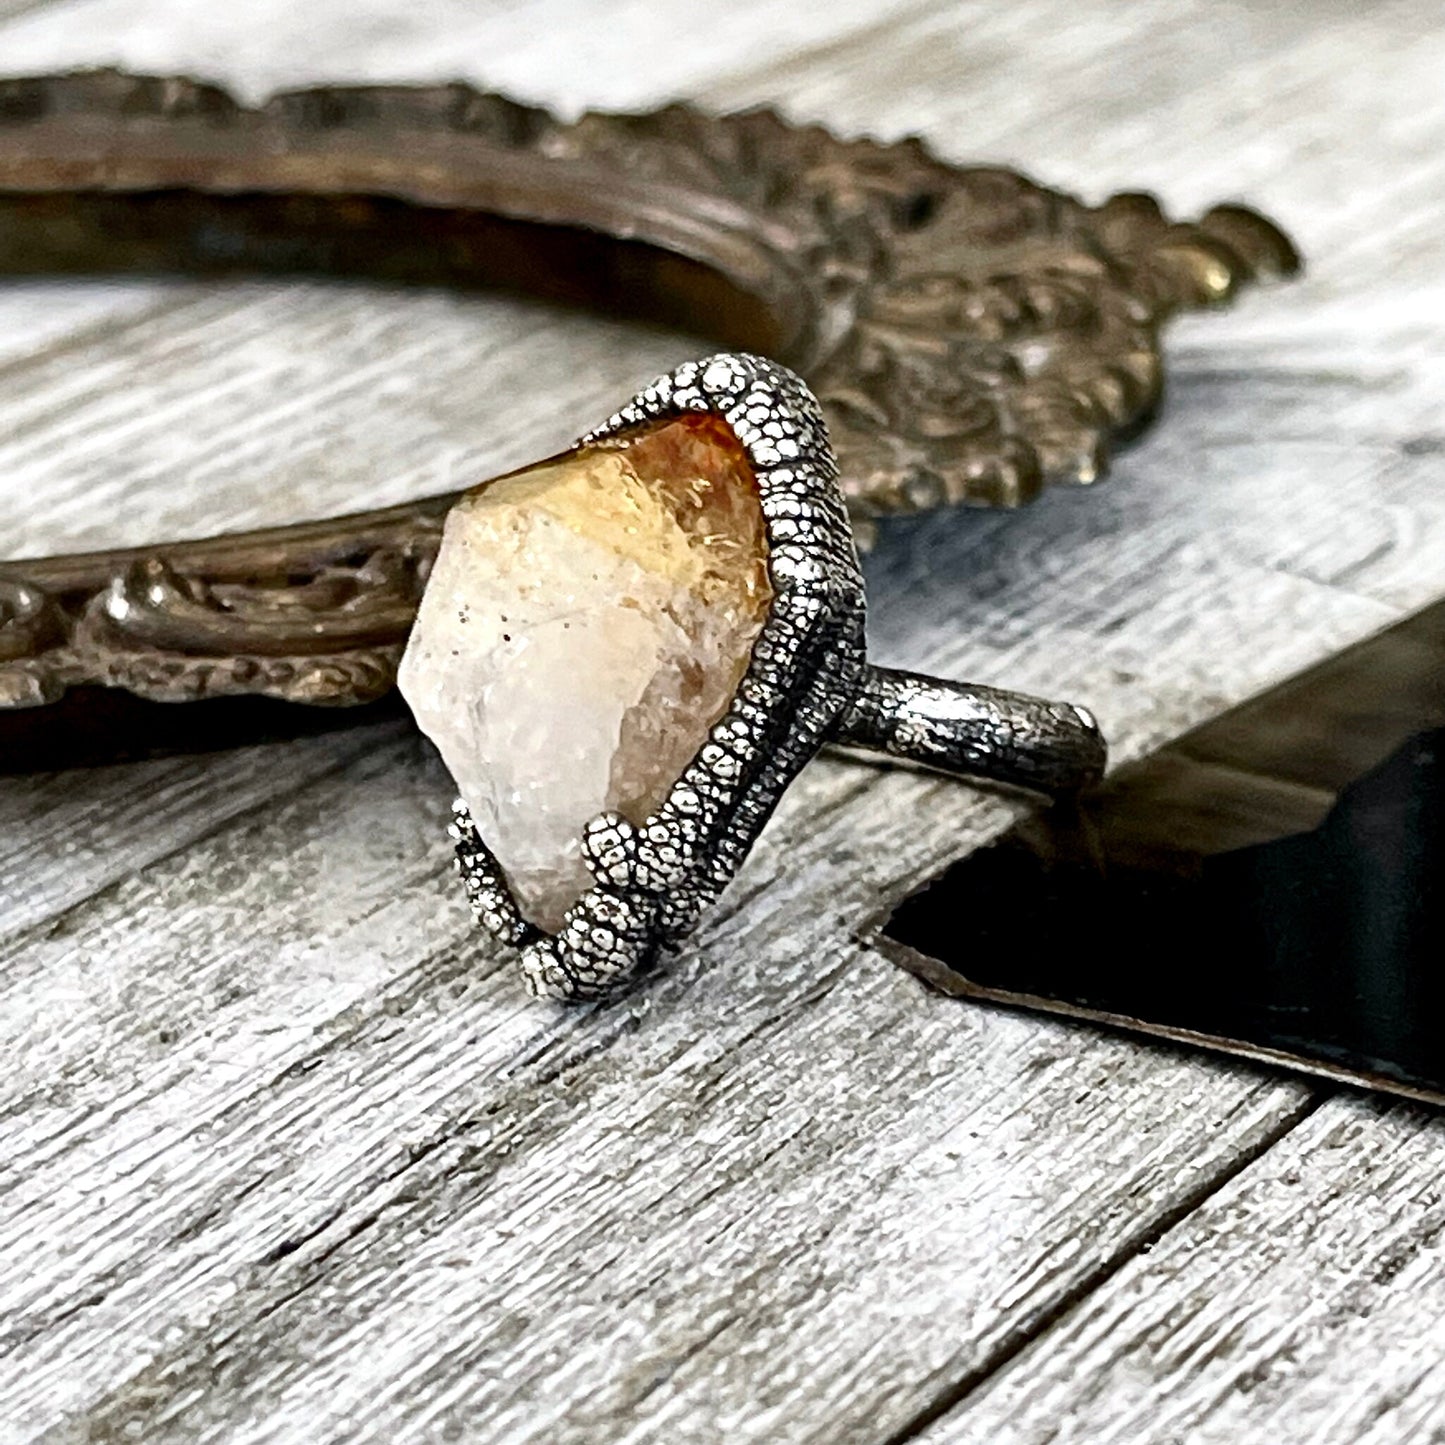 Size 8.5 Raw Citrine Crystal Point Ring Set in Fine Silver / Foxlark Collection - One of a Kind / Big Crystal Ring Witchy Jewelry Gemstone